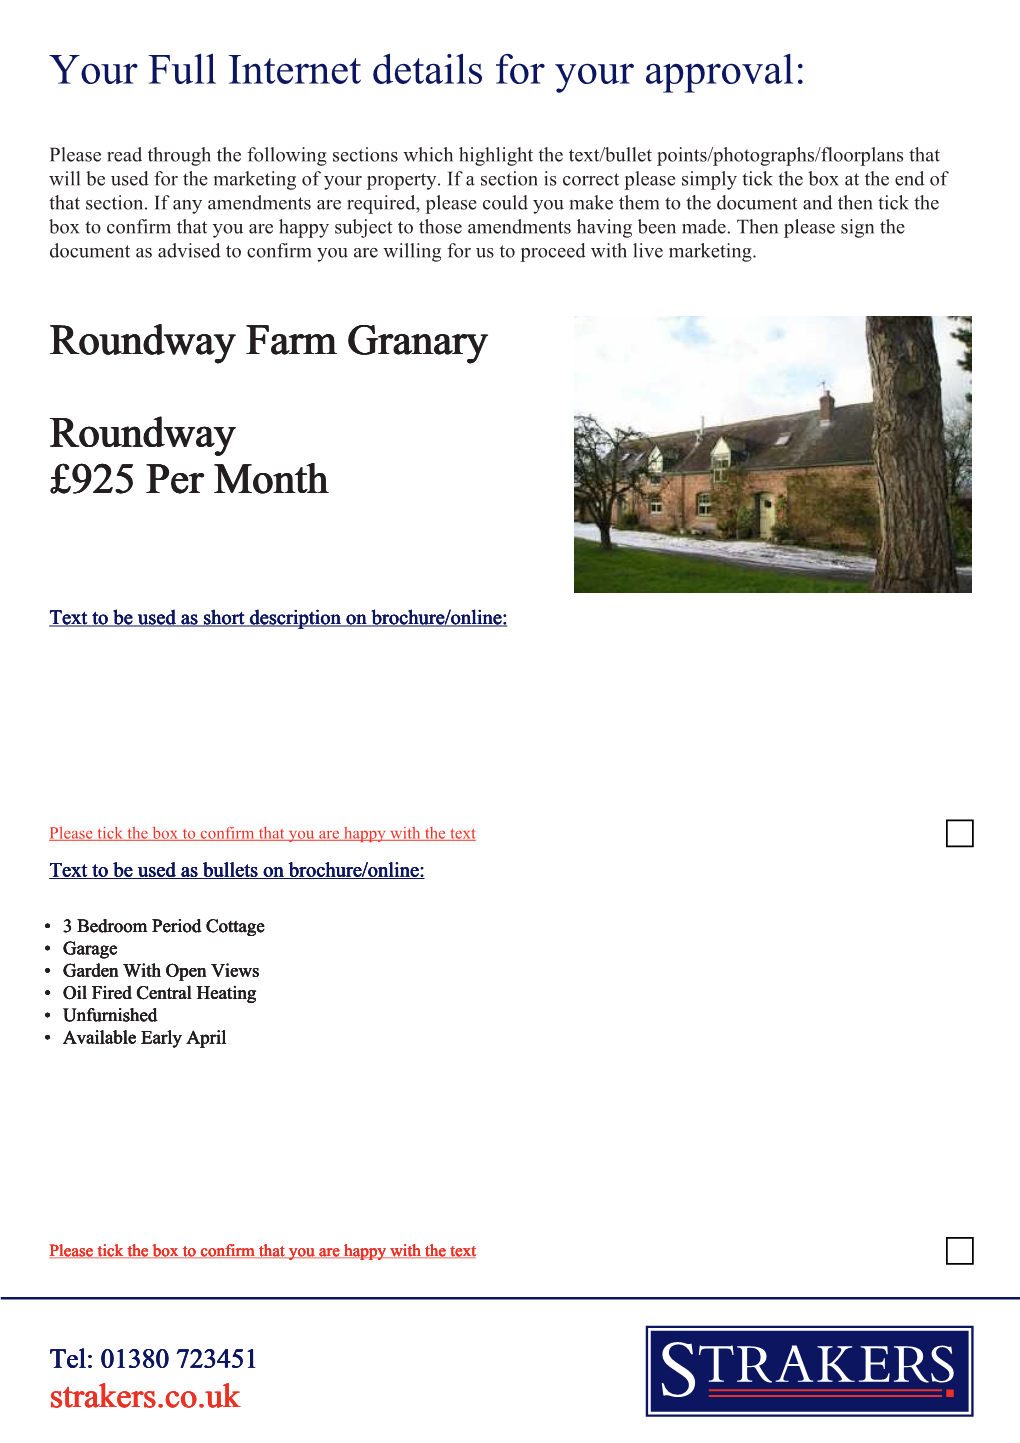 Roundway Farm Granary Roundway £925 Per Month Your Full Internet